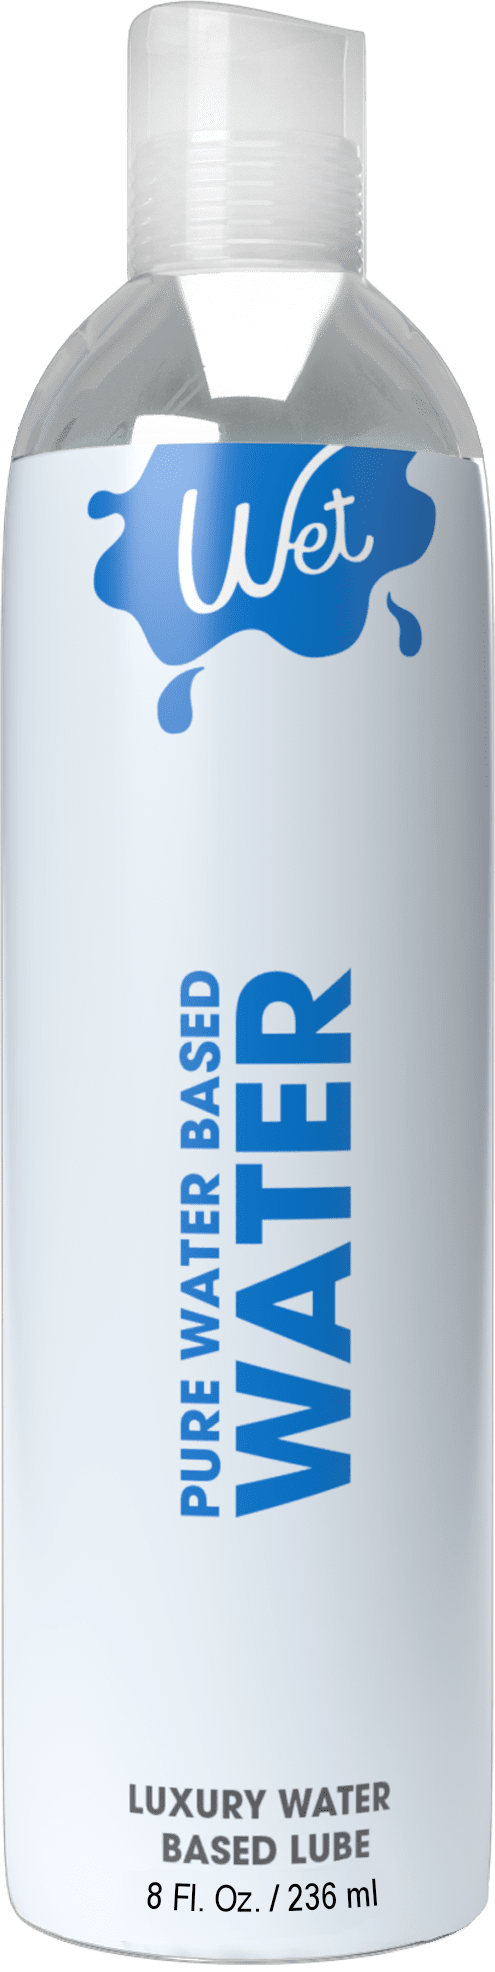 Wet Water-Based Premium Personal Lubricant | CheapLubes.com